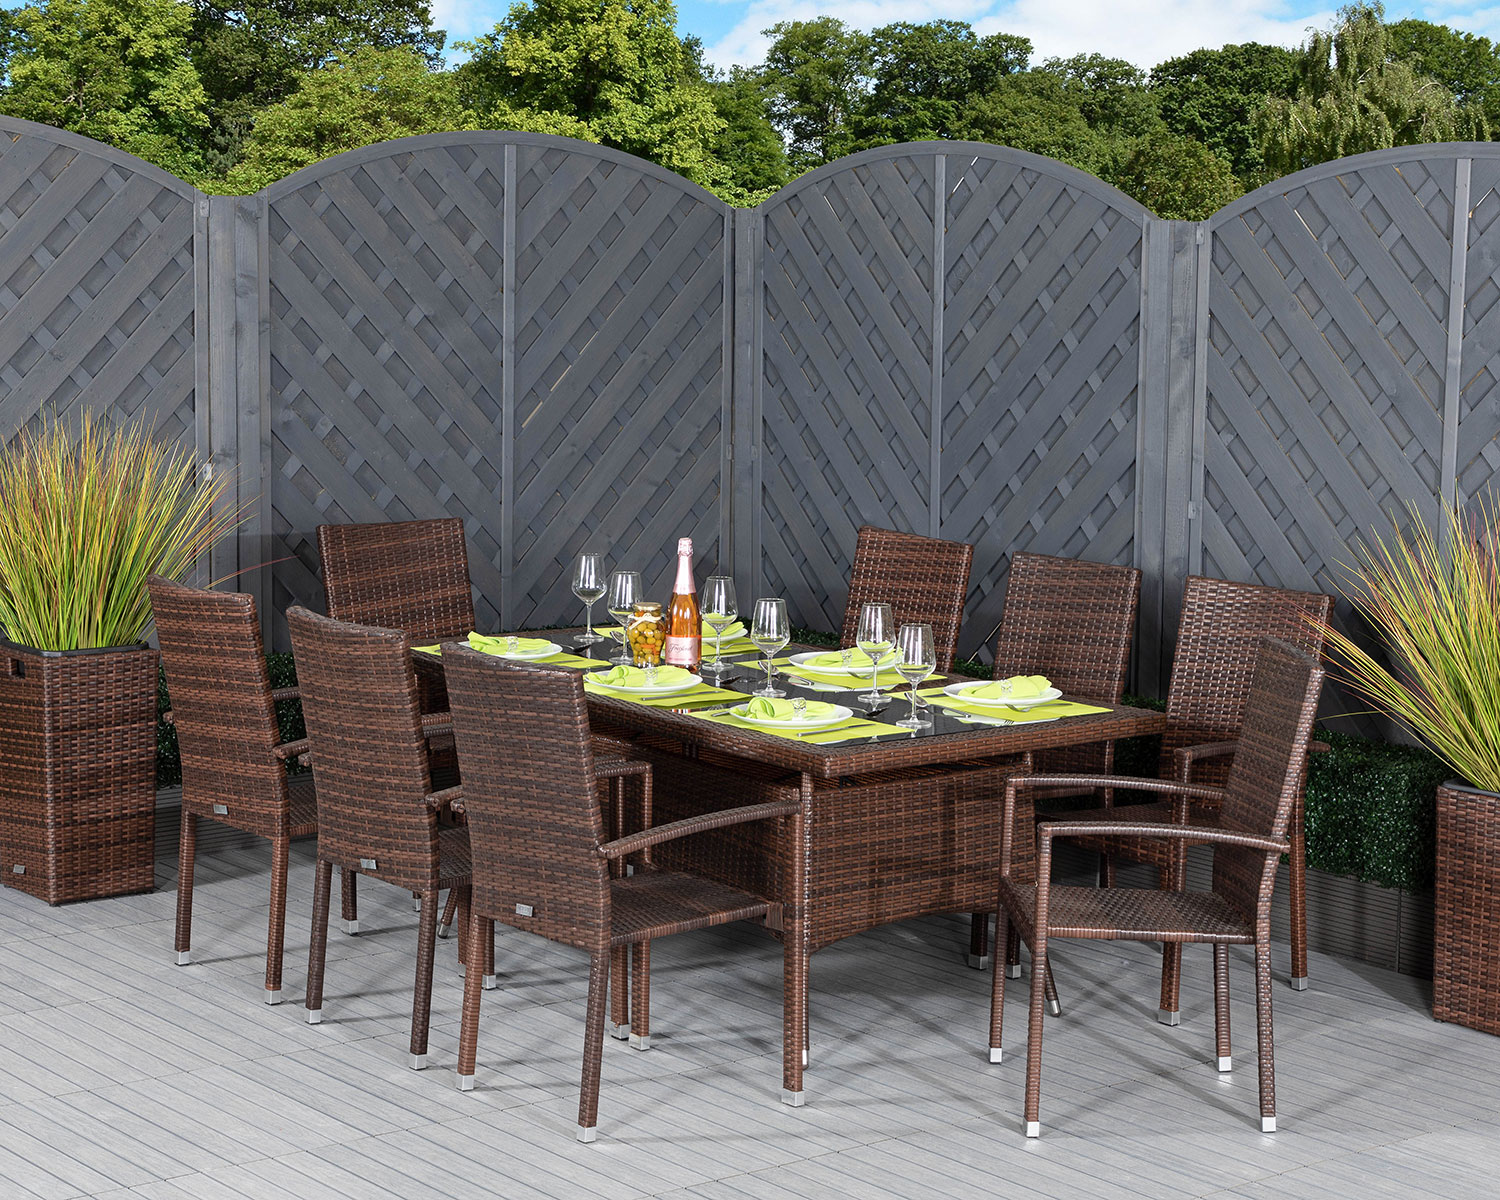 8 Seat Rattan Garden Dining Set With Large Rectangular Dining Table in